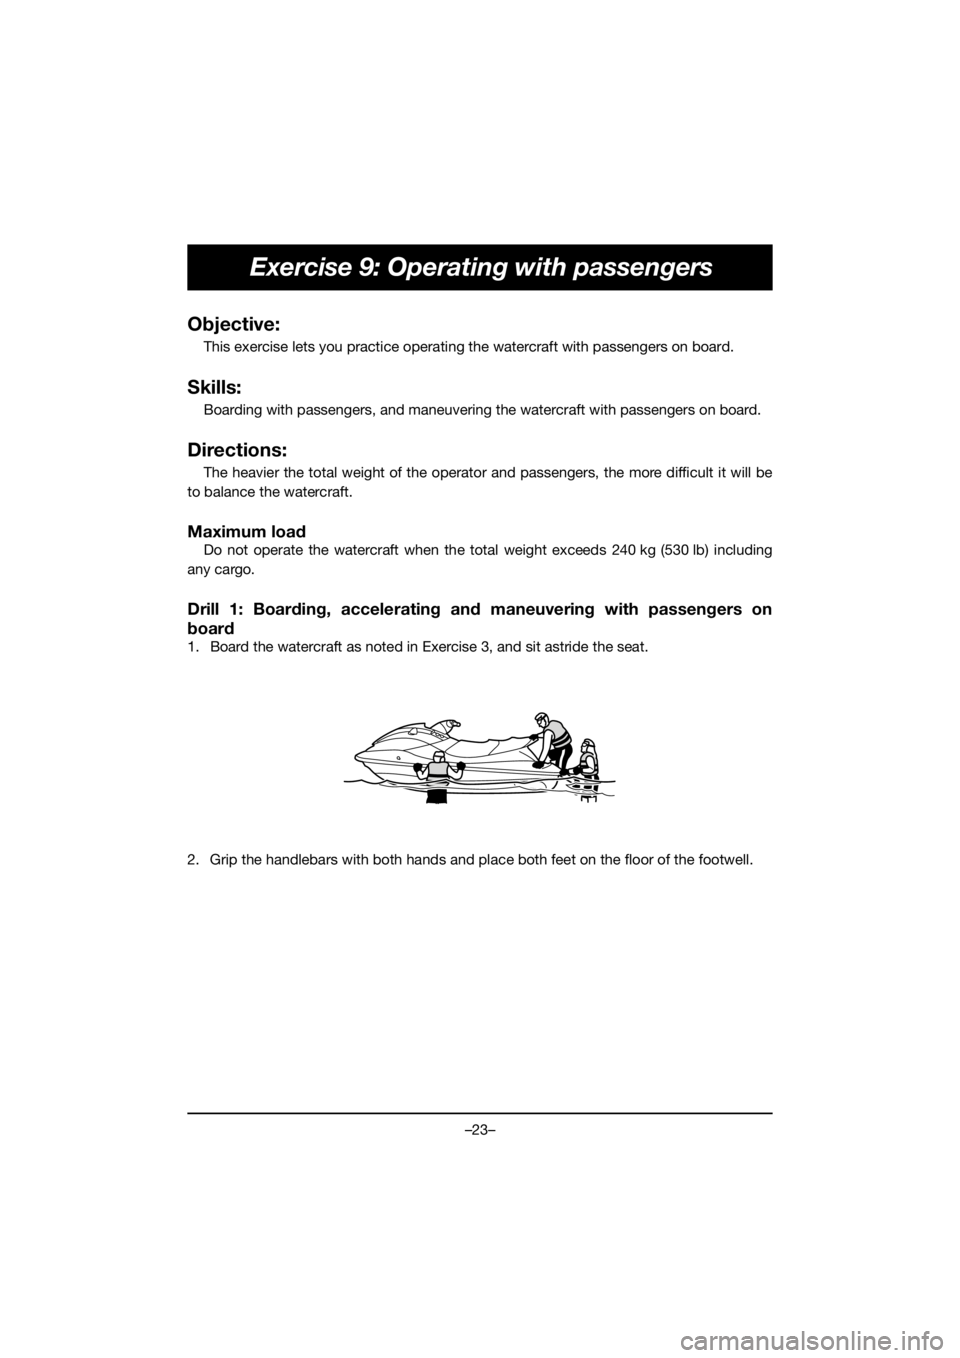 YAMAHA VX DELUXE 2021  Manuale de Empleo (in Spanish) –23–
Exercise 9: Operating with passengers
Objective:
This exercise lets you practice operating the watercraft with passengers on board.
Skills:
Boarding with passengers, and maneuvering the water